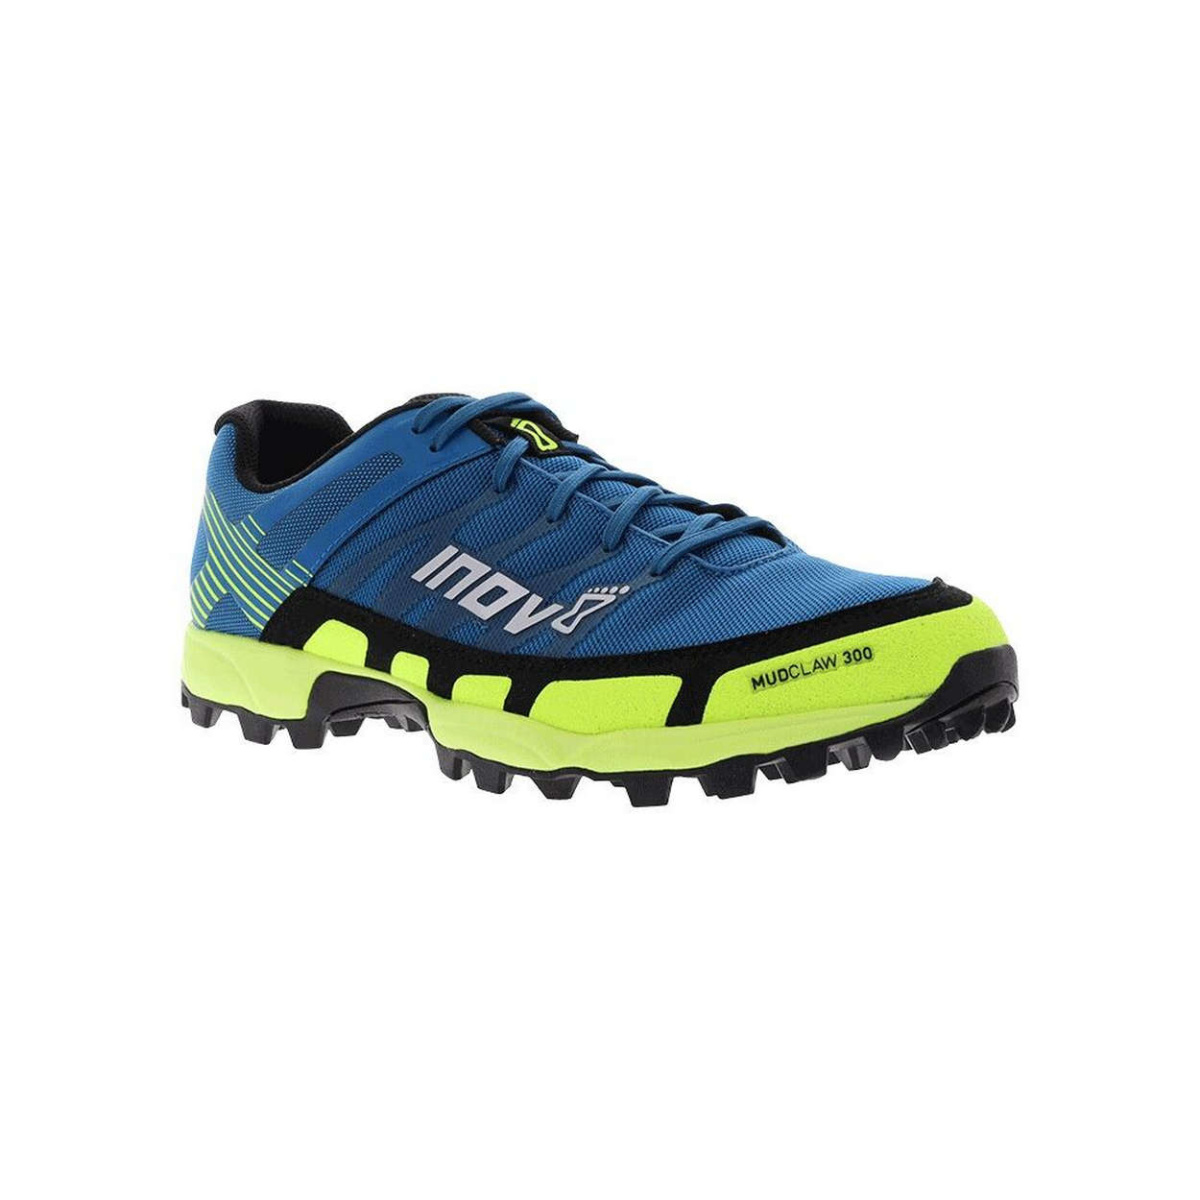 inov 8 mens Mudclaw 300 trail running shoe Fast and Light CH 007